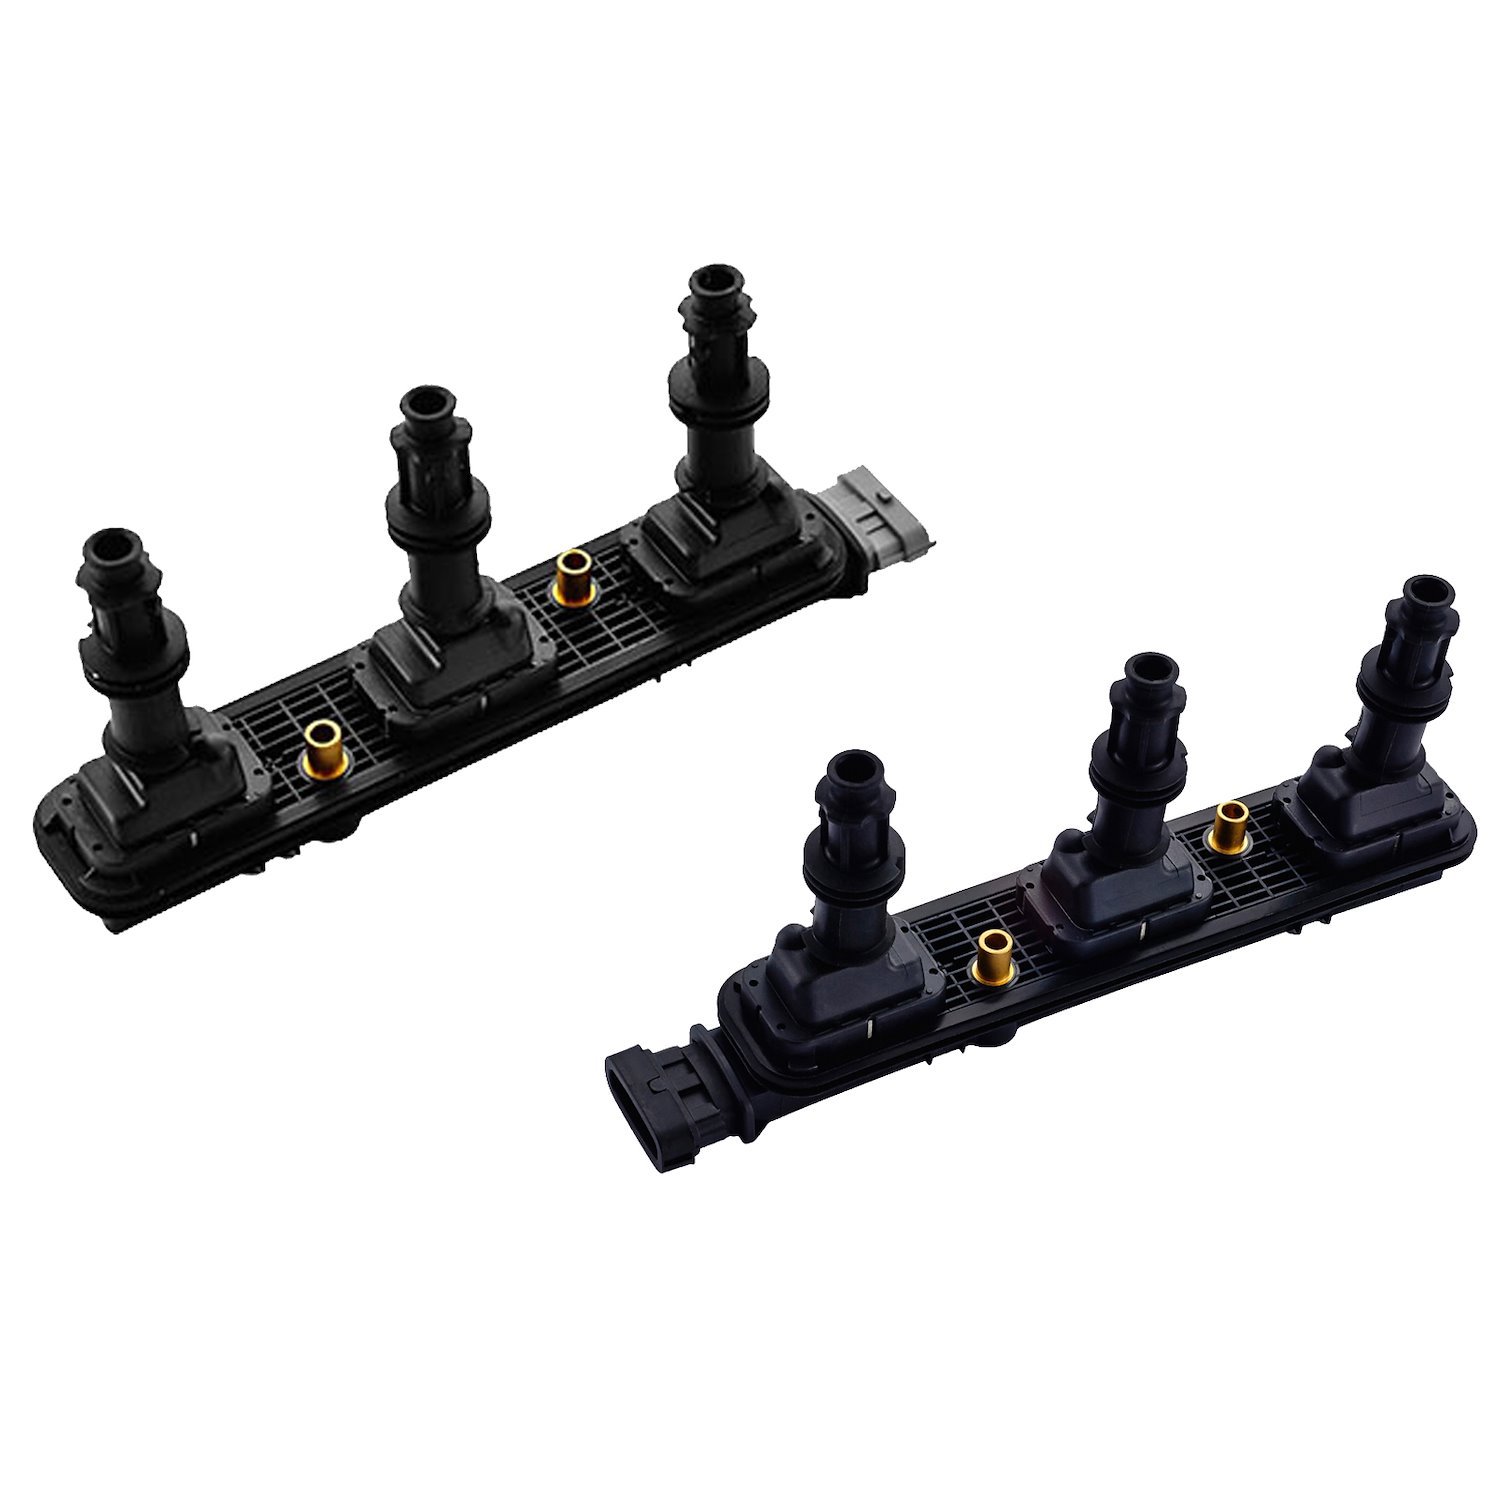 OE Replacement Ignition Coils for 1999-2004 Cadillac Catera CTS 3.0L 3.2L V6 [Black]